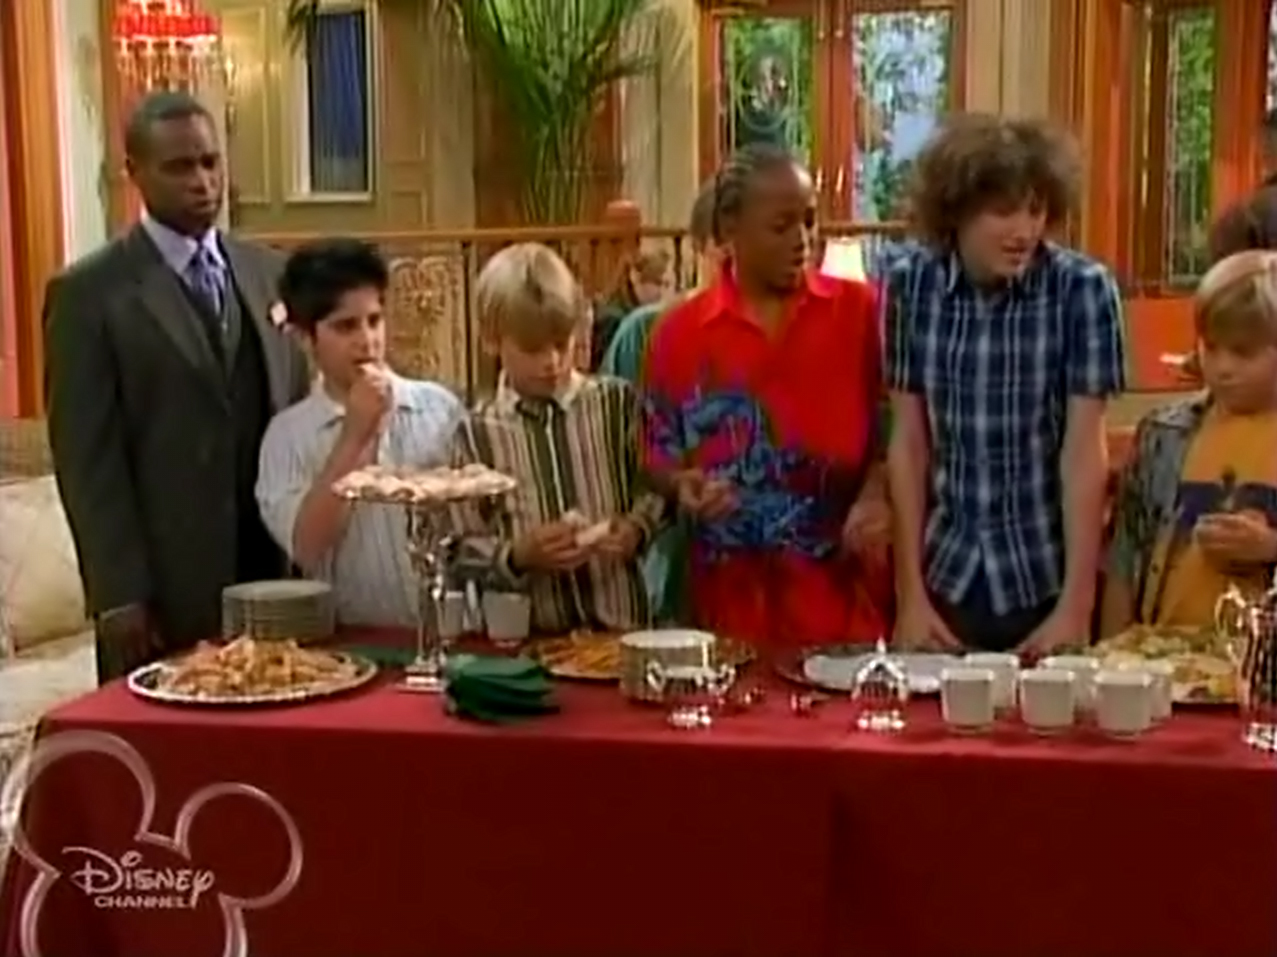 suite life of zack and cody season 3 episode 24